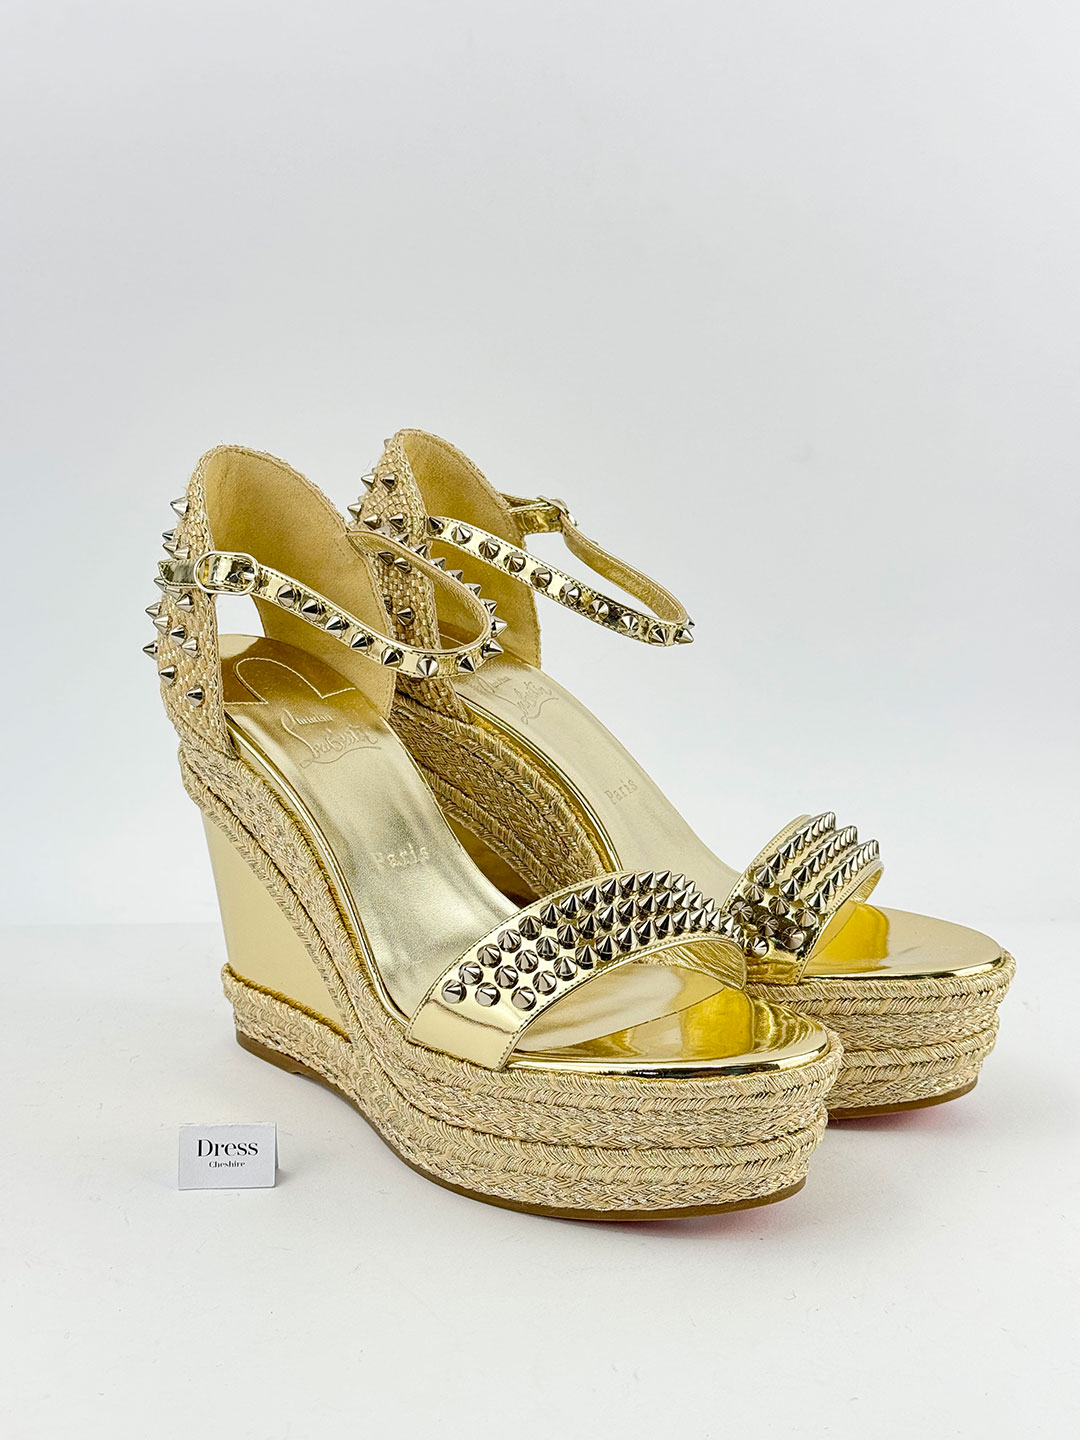 Christian Louboutin Madmonica Espadrille Wedge Sandals 120 Gold Size 41 ...